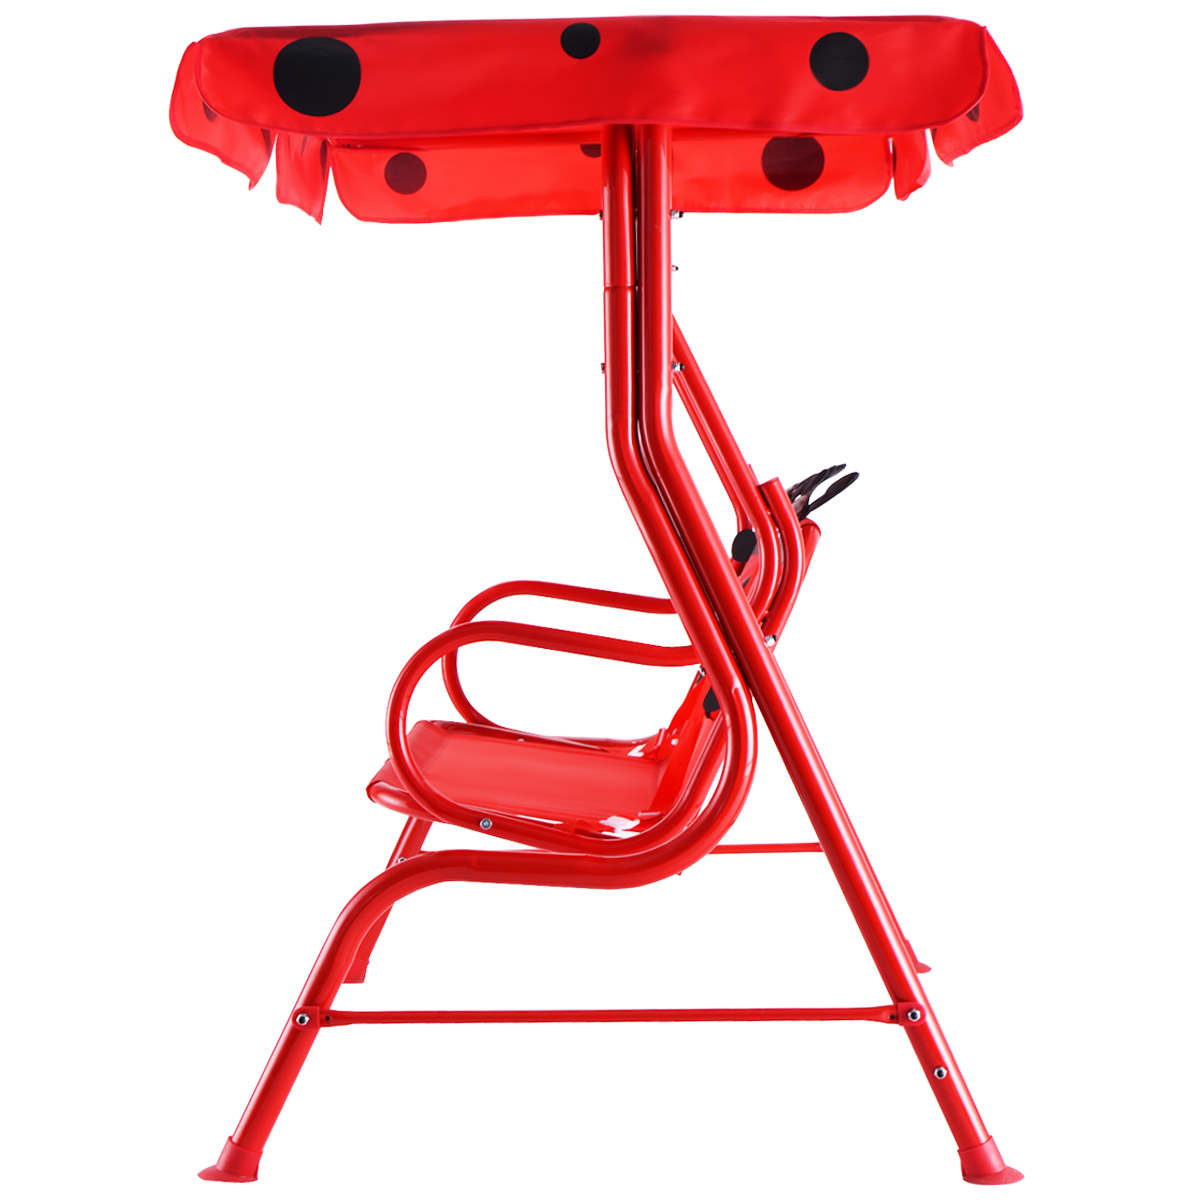 Costway Kids Patio Swing Chair Children Porch Bench Canopy 2 Person Yard Furniture red - image 4 of 10